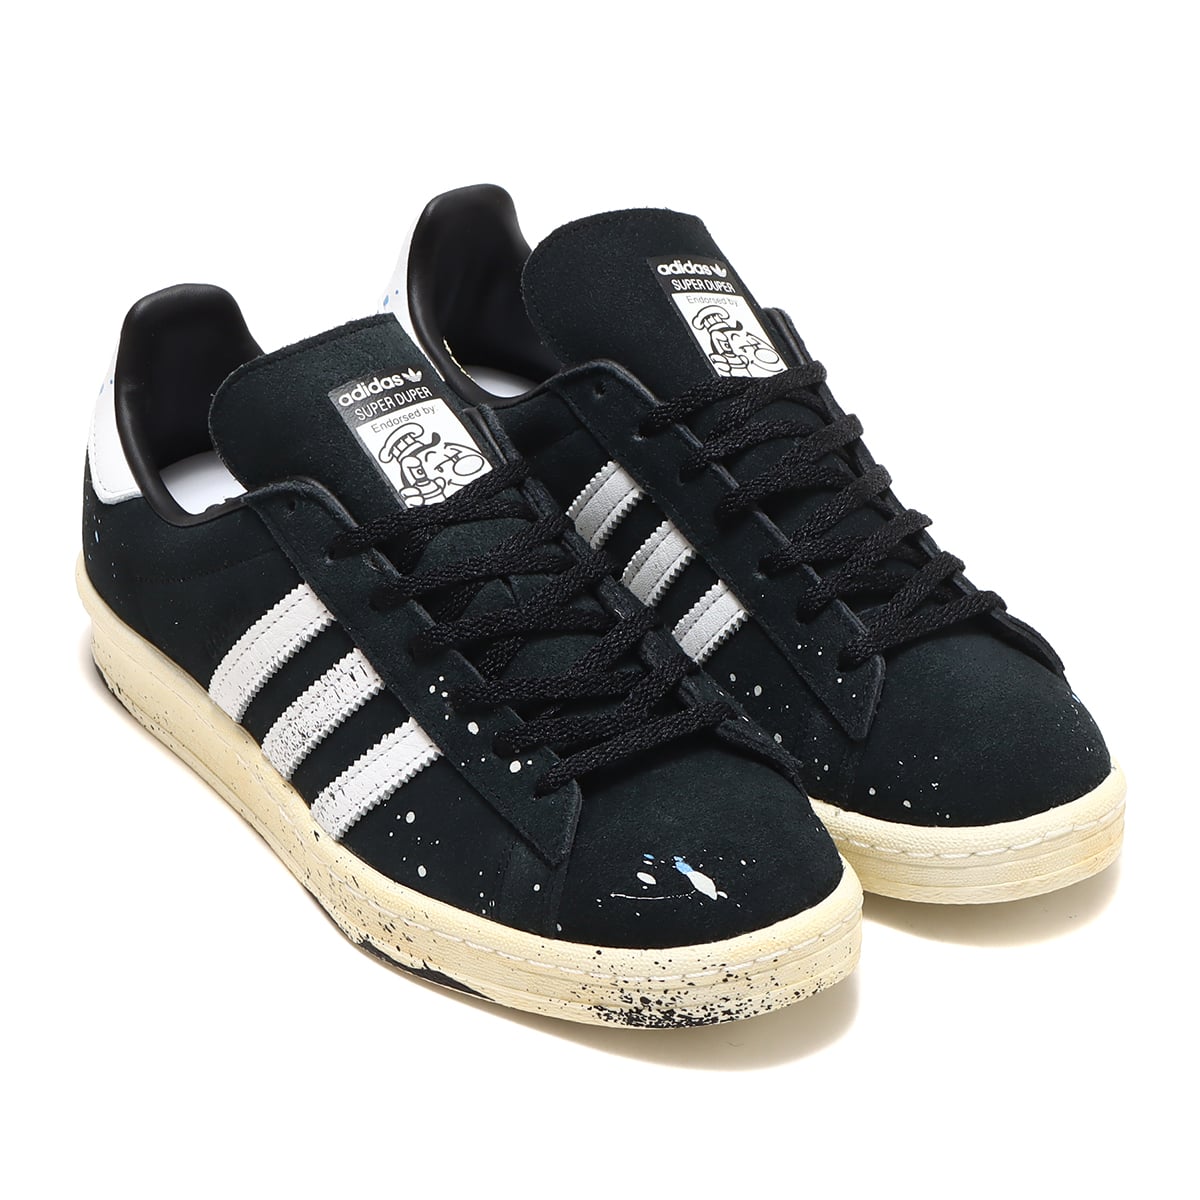 adidas CAMPUS 80s COOK CORE BLACK/FOOTWEAR WHITE/REAL BLUE 22SS-S_photo_large